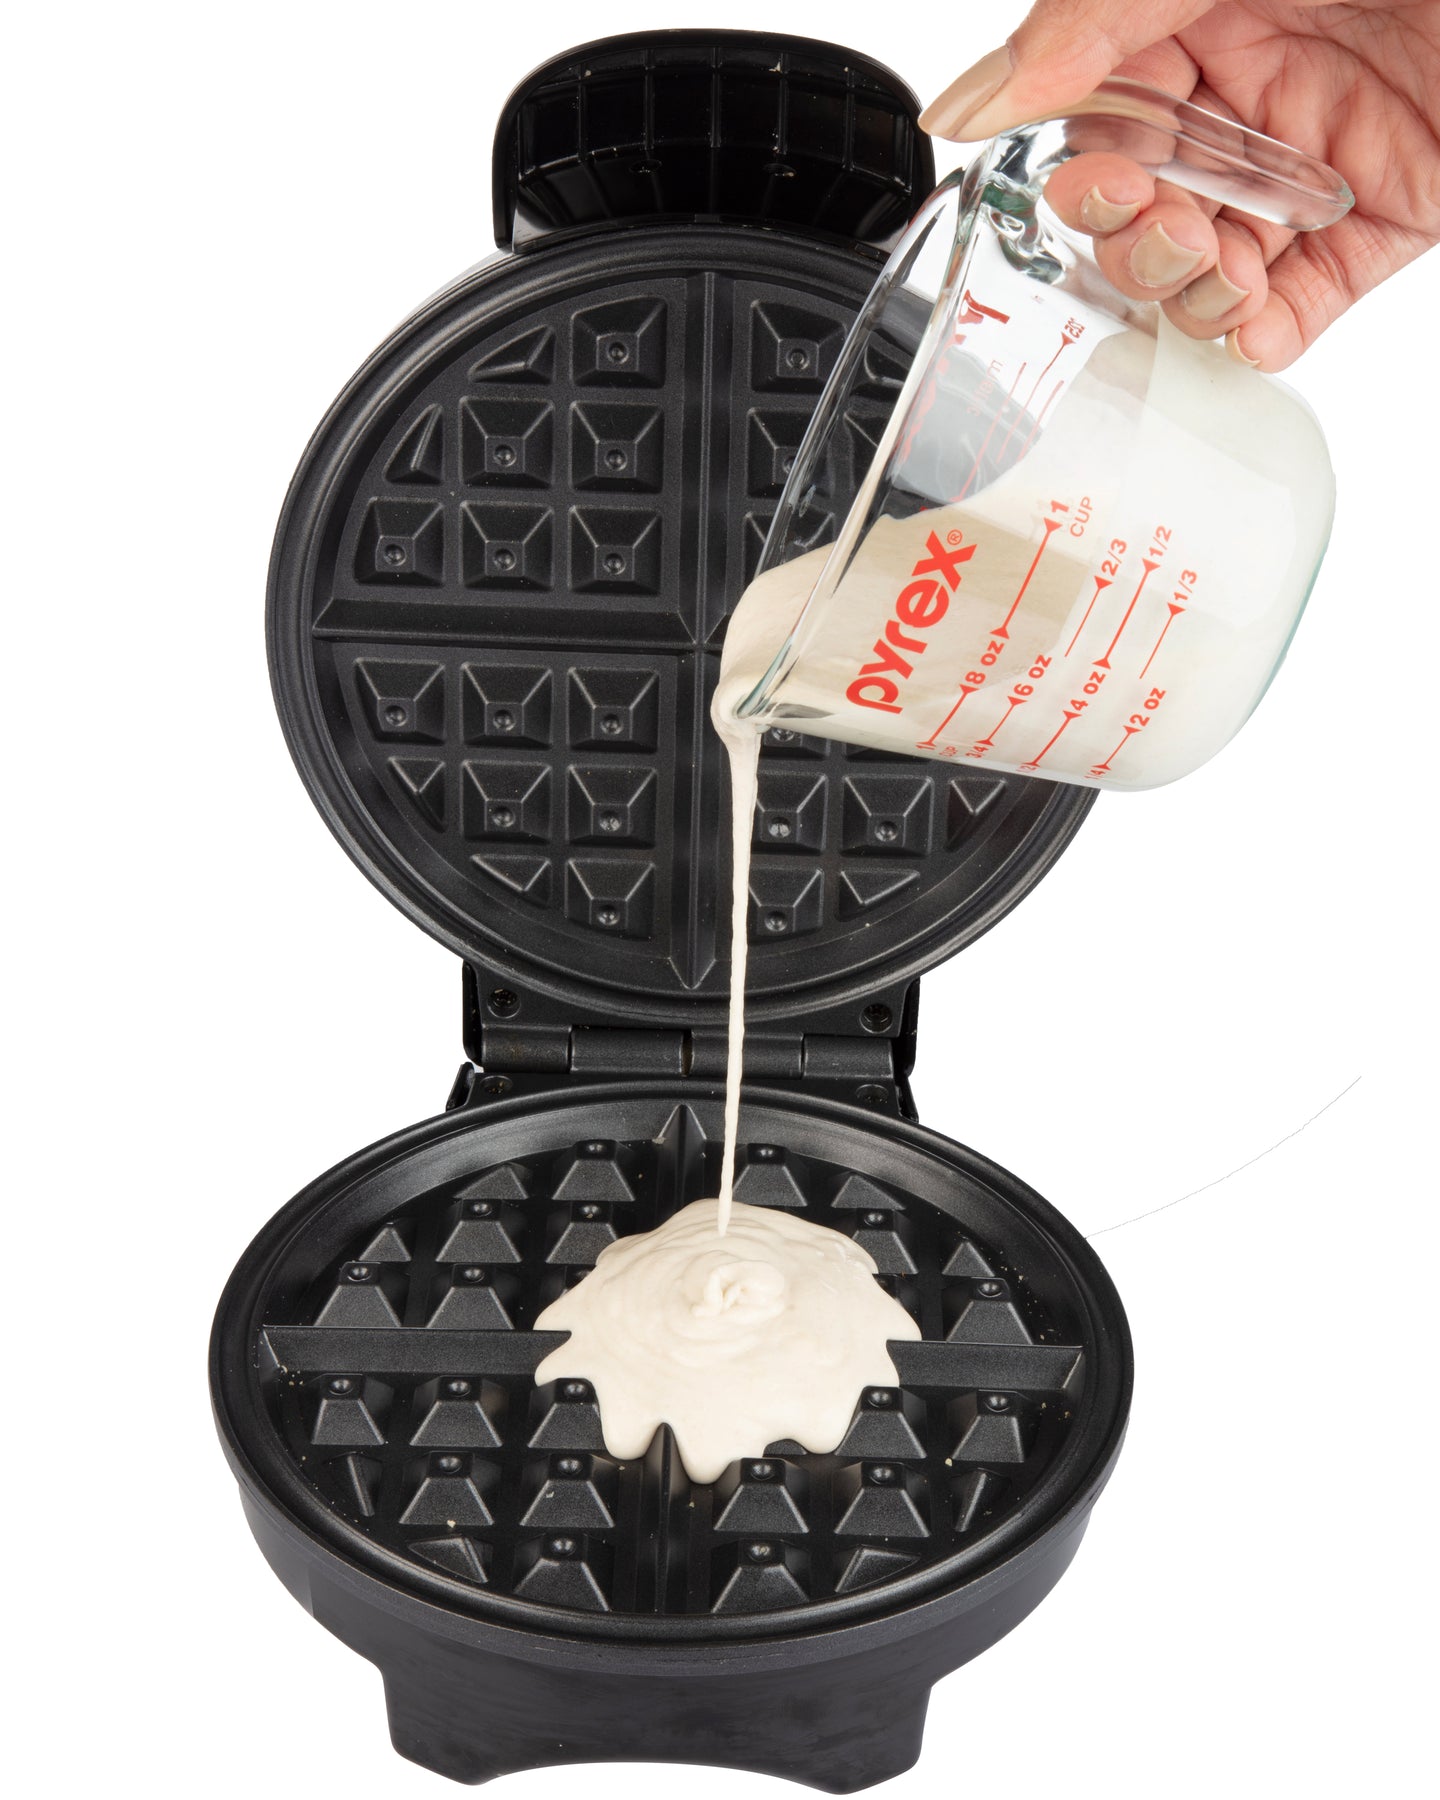 CucinaPro Electric Nonstick 4 Square Belgian Waffle Maker